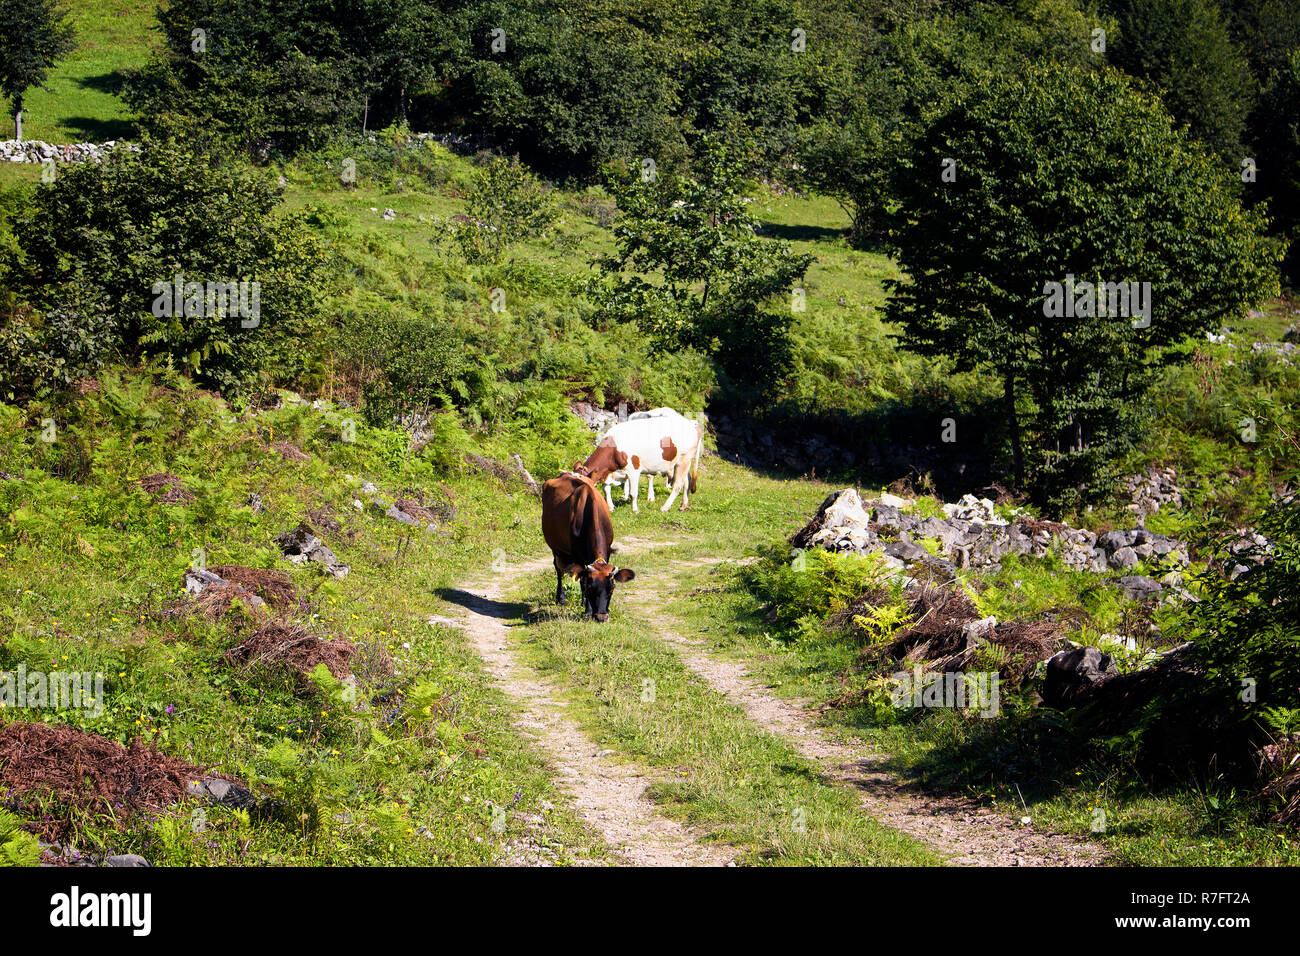 View of cows on a road at high plateau. The image is captured in Trabzon/Rize area of Black Sea region located at northeast of Turkey. Stock Photo